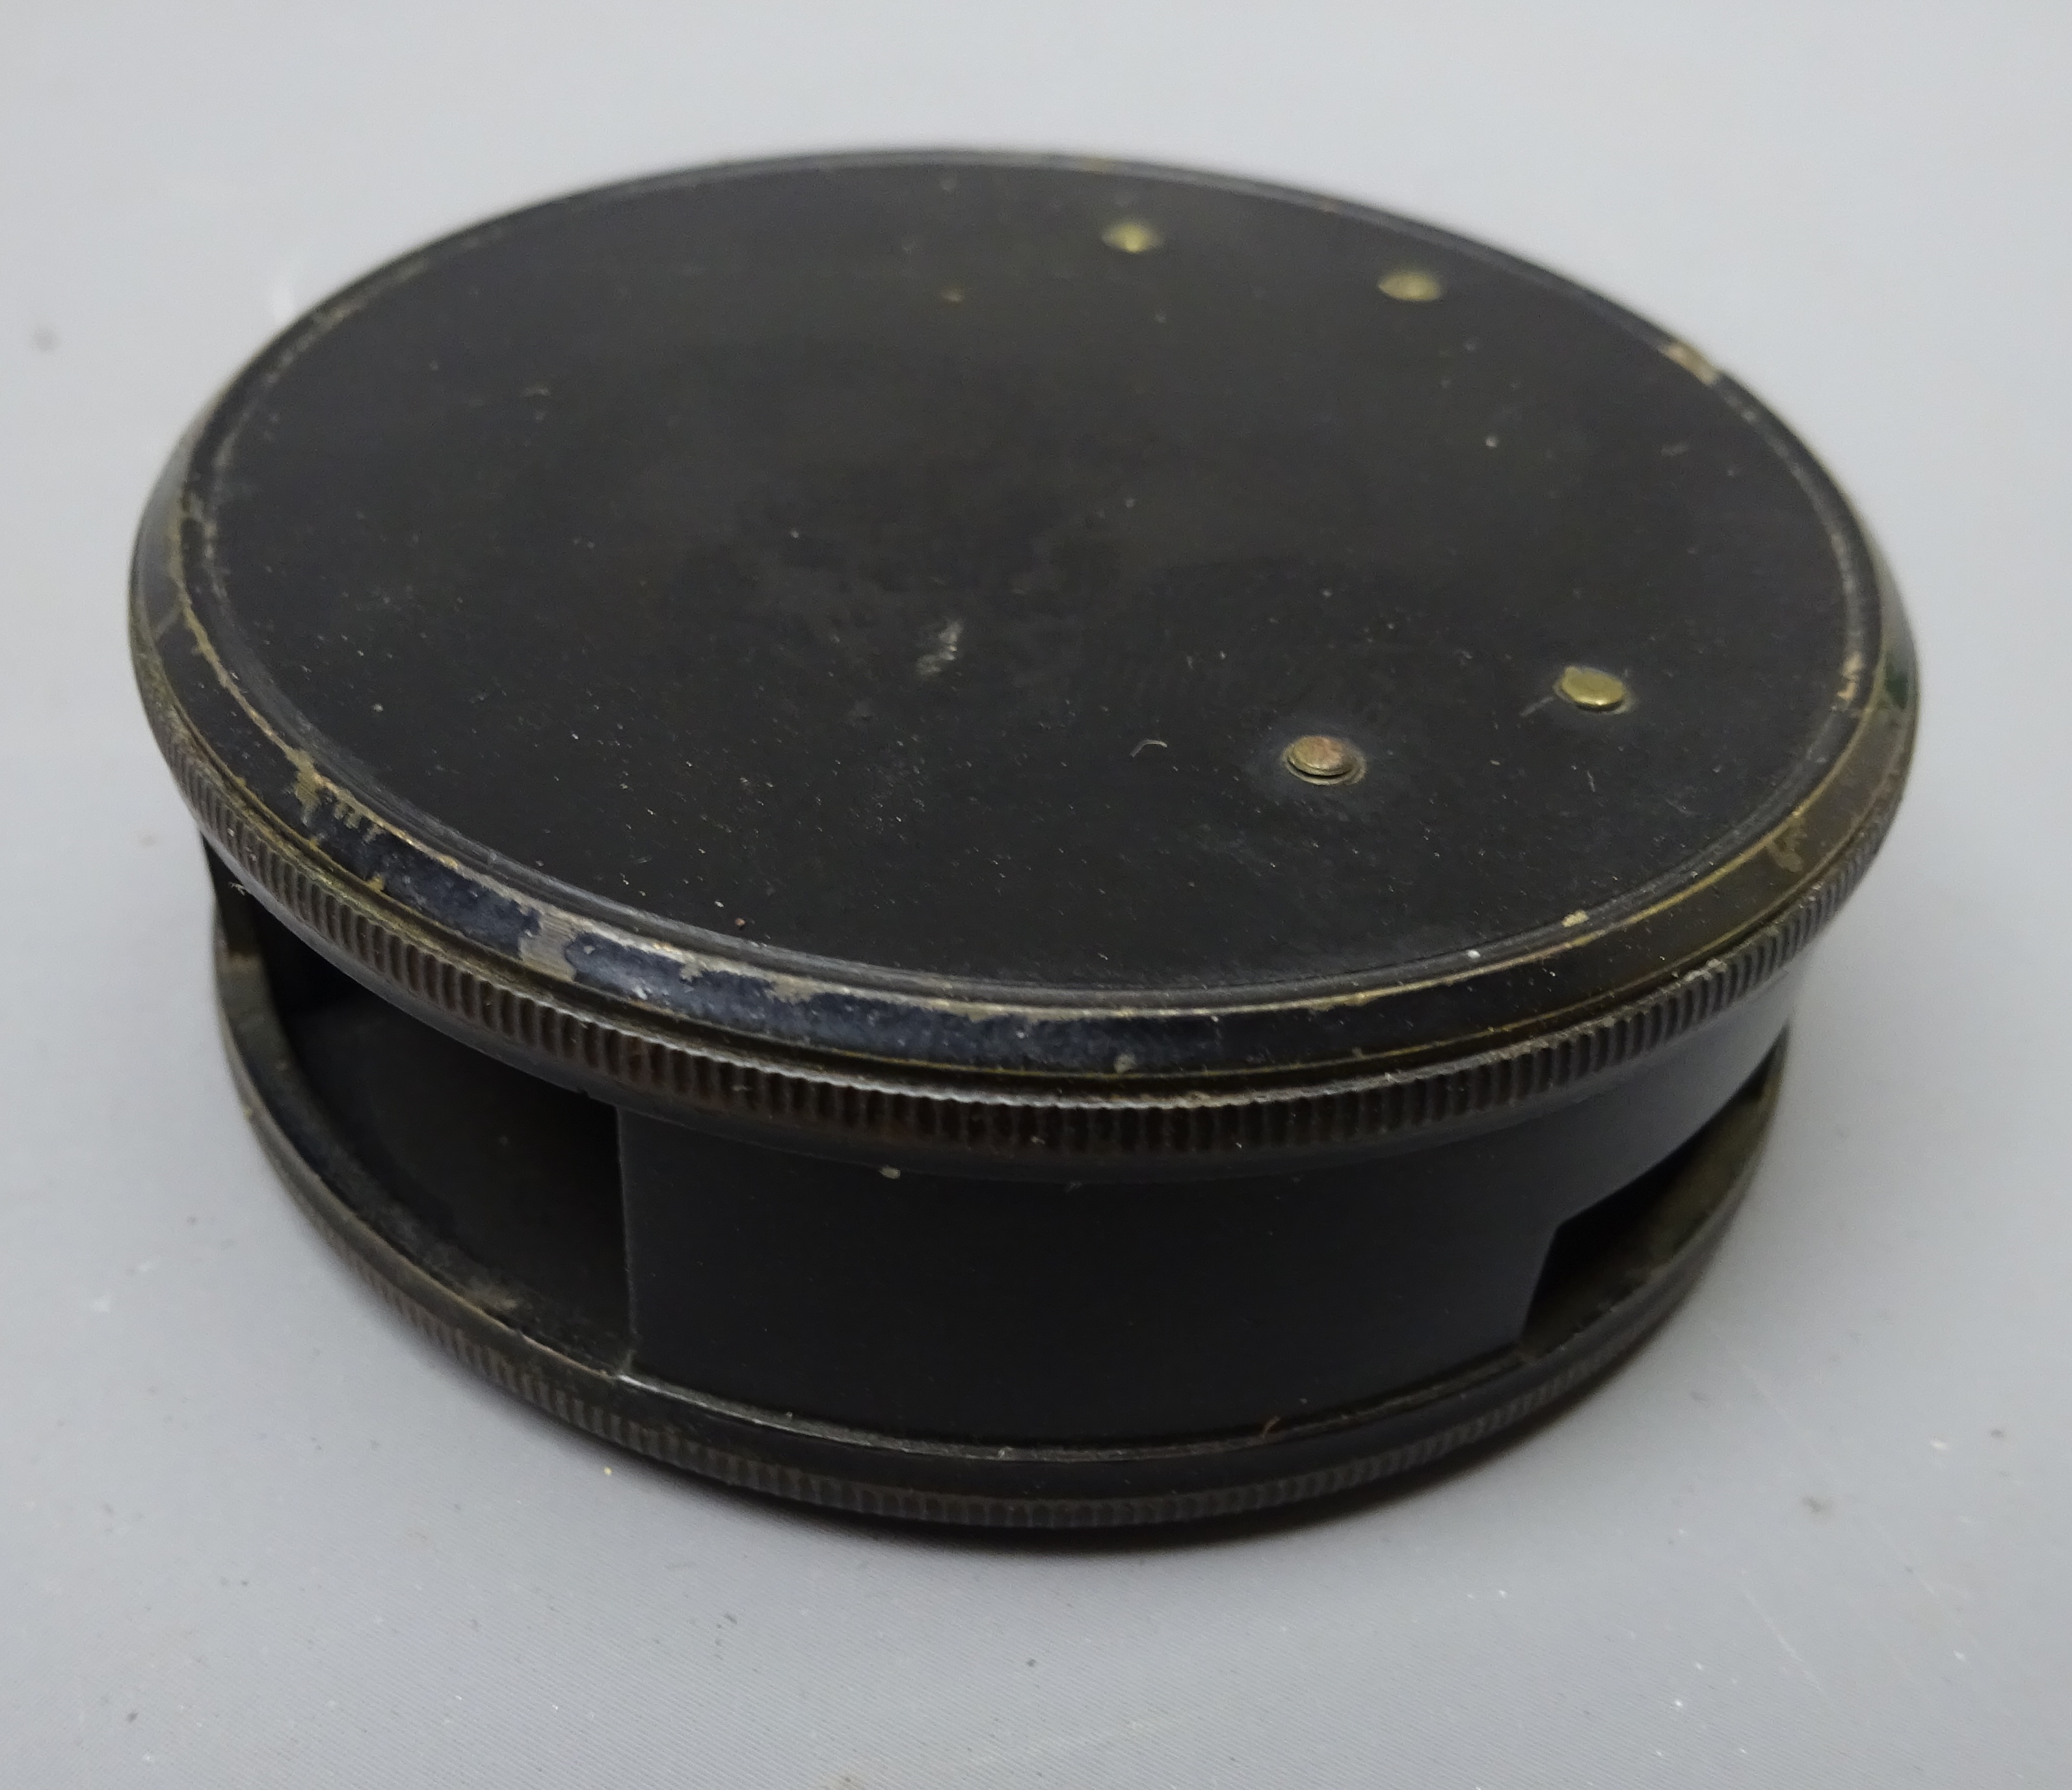 Right angle viewer by F. Barker & Son, black japanned drum shape body in leather carrying case D5. - Image 2 of 2